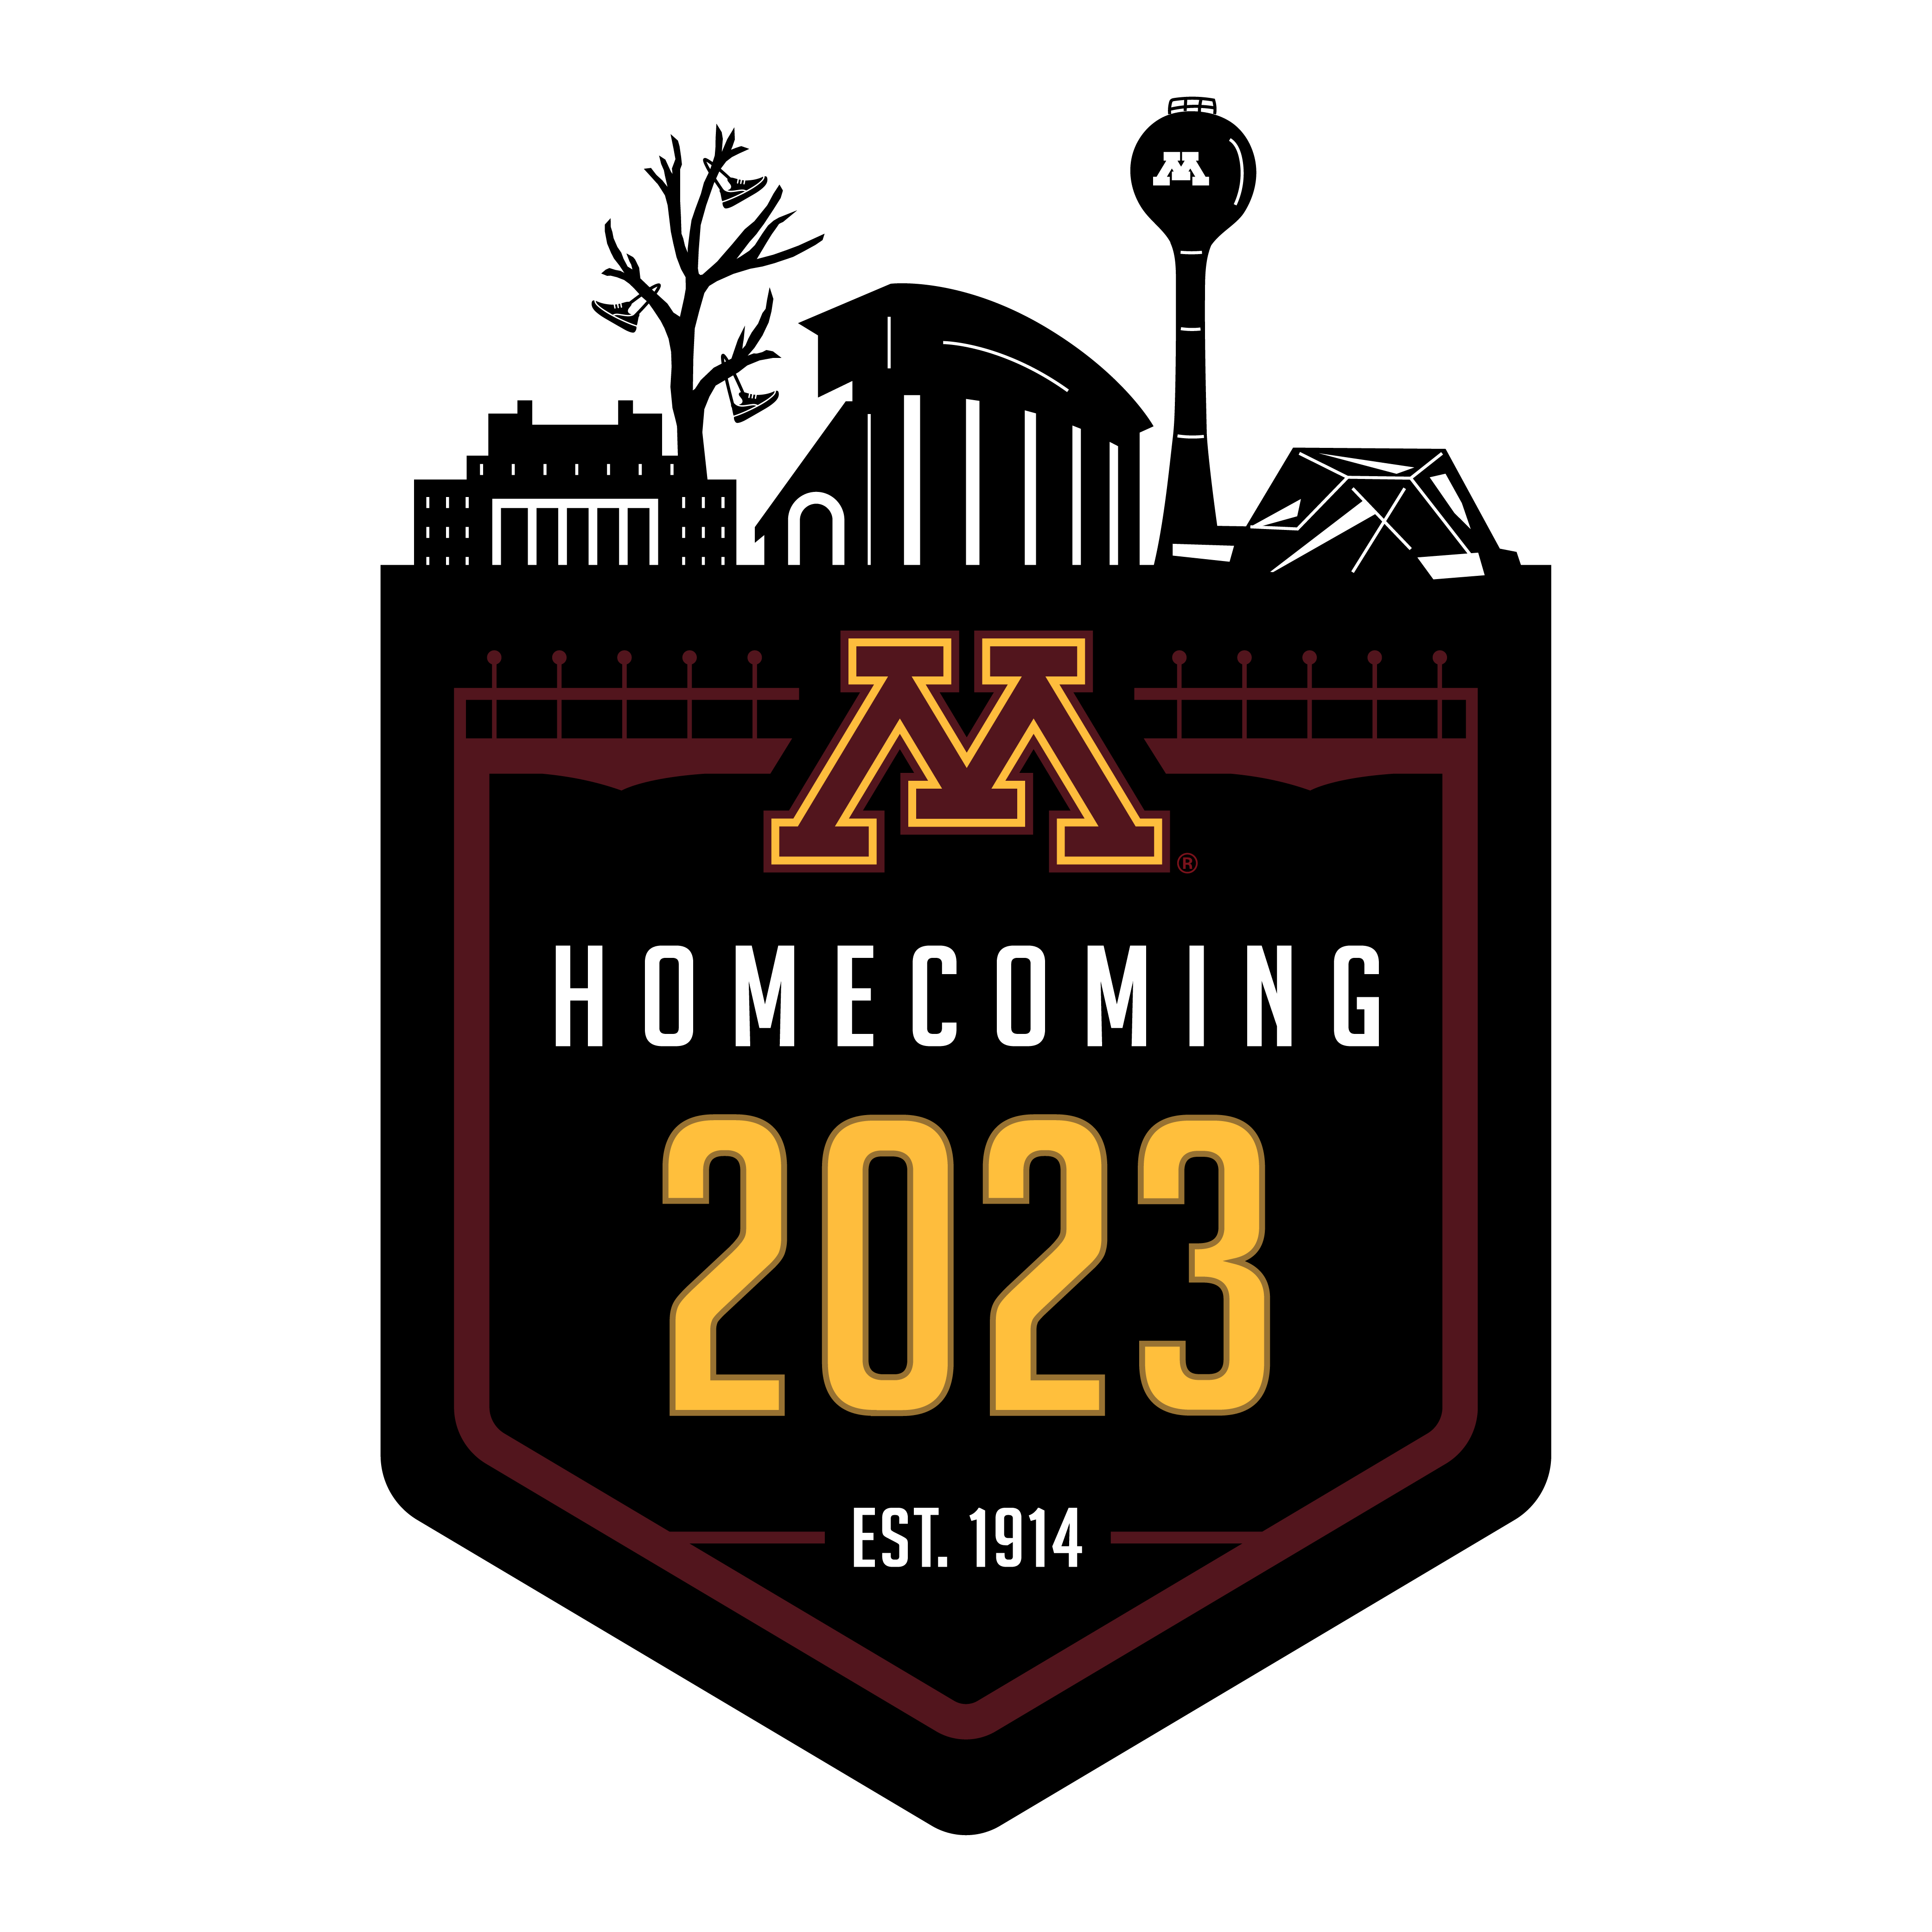 Homecoming logo full color